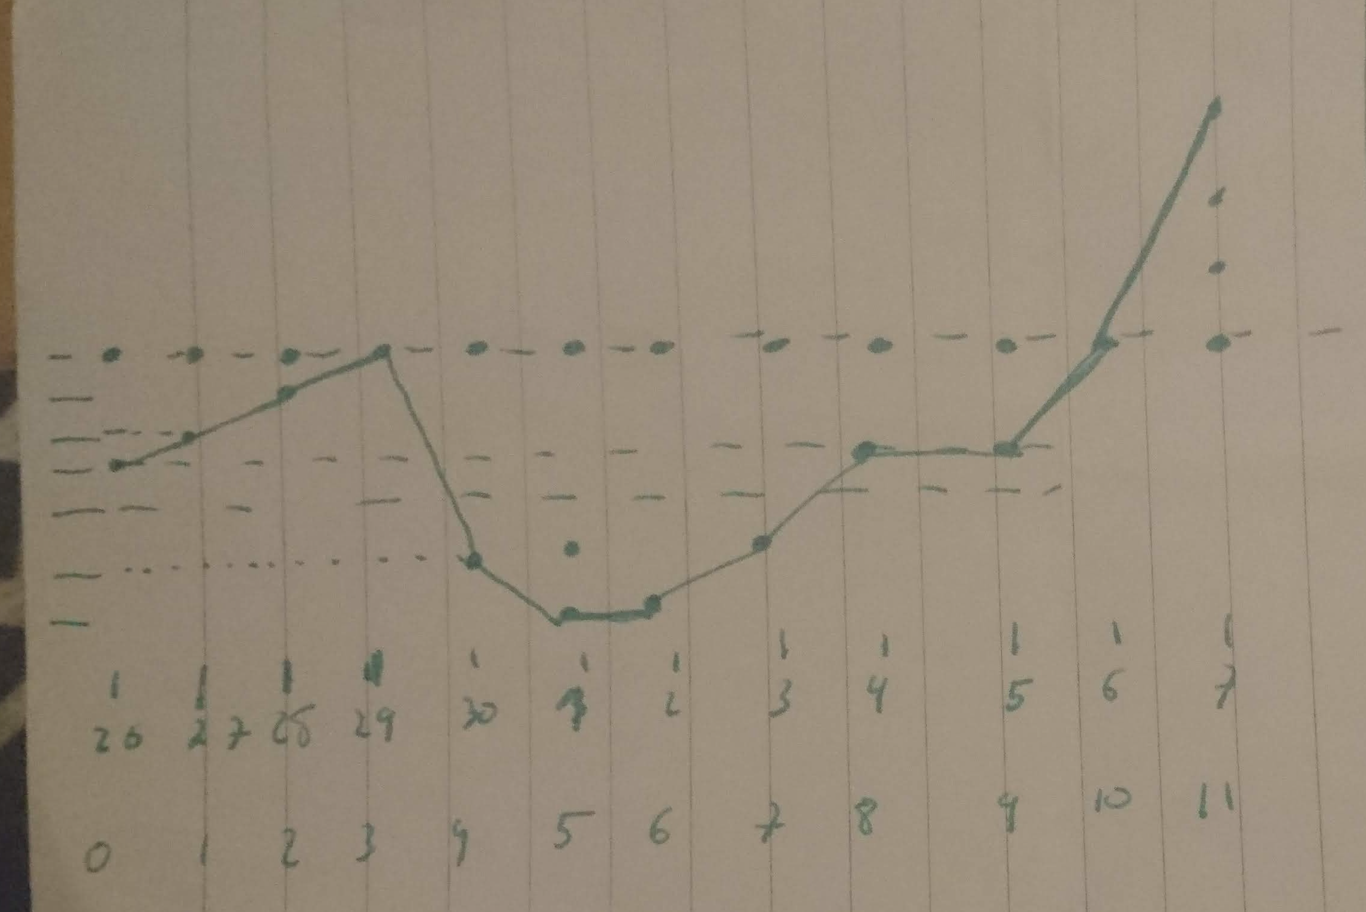 I made a graph from the indentures on the label. The idea here was to have an “absolute” value for my mood, tracking only my perception of how I felt relatively to the previous day. Variations in scale can be interpreted like — a bit more or less anxiety than the previous day: 1 “unit”; a stronger variation: 2 units; panic attacks: 3 units. First row of numbers are the days, from the 26th of September to the 7th of October. Day one is when the course actually started and day zero is the day before, when I had my panic attack during the first sitting. The markings on the left are my mood scale and needless to say, it’s as subjective as it comes. Day zero is three “units” worst than the day before (to account for the panic attack.) Day one was a bit better but still pretty miserable. Day three I felt as good as the day before the course. Day four is when I got sick and day five I hit my lowest mood. Things to note: during the course, my mood was always worst than before the course. Getting better was always slower than getting worst. Leaving the centre had a symmetric effect to the panic attack in the beginning.